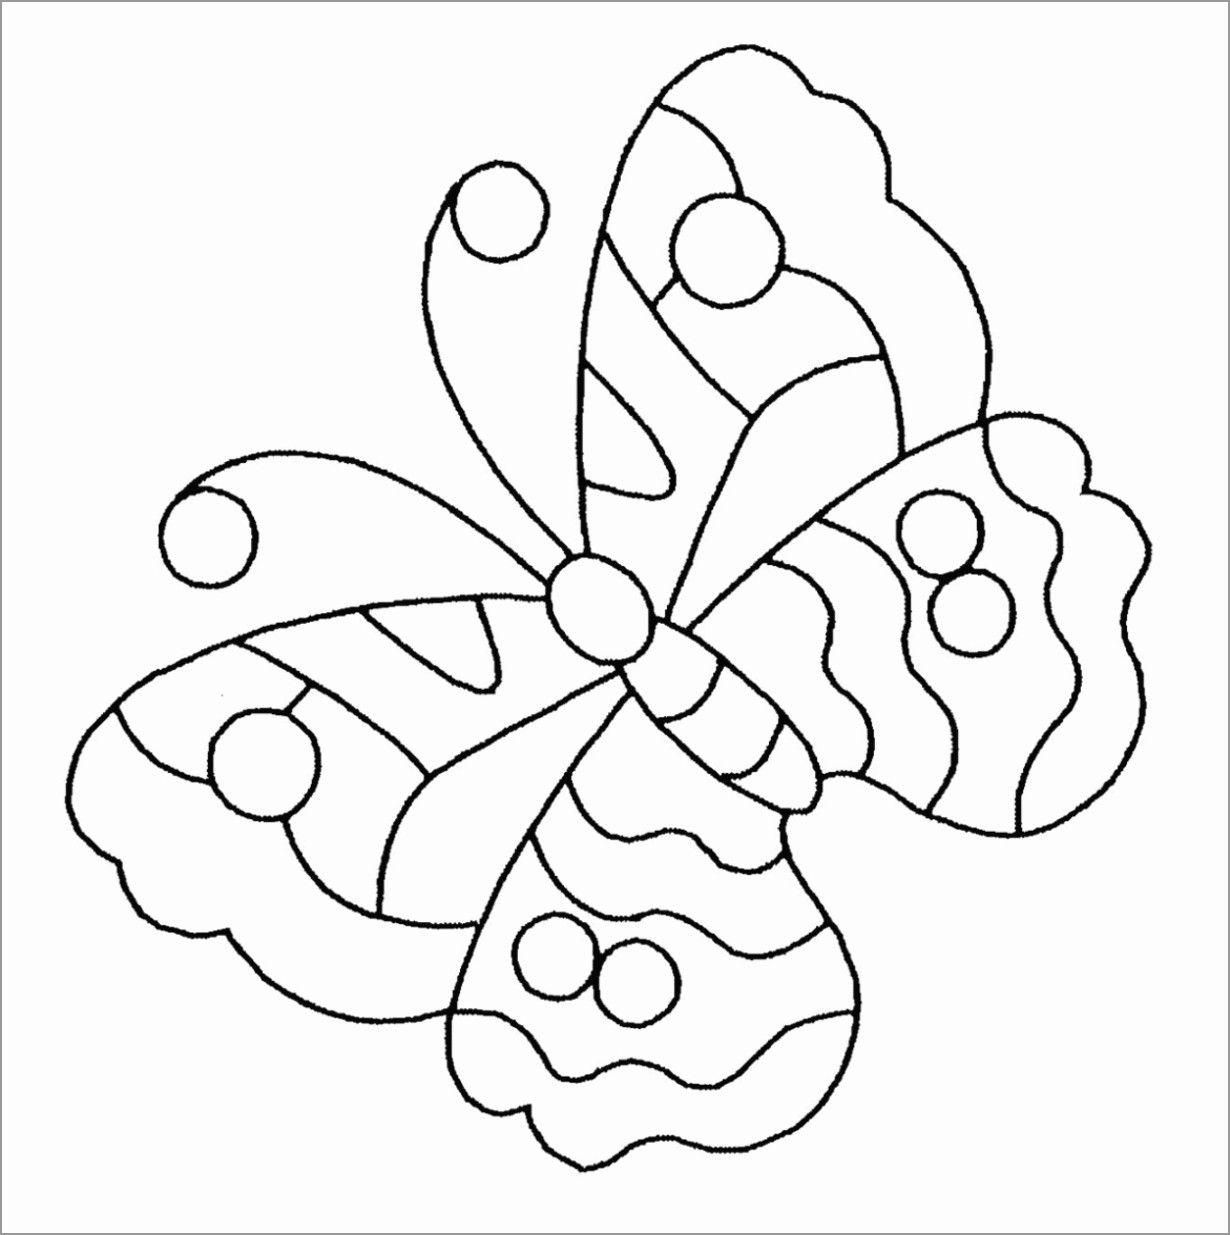 Printable butterfly Coloring Page for Kids   ColoringBay